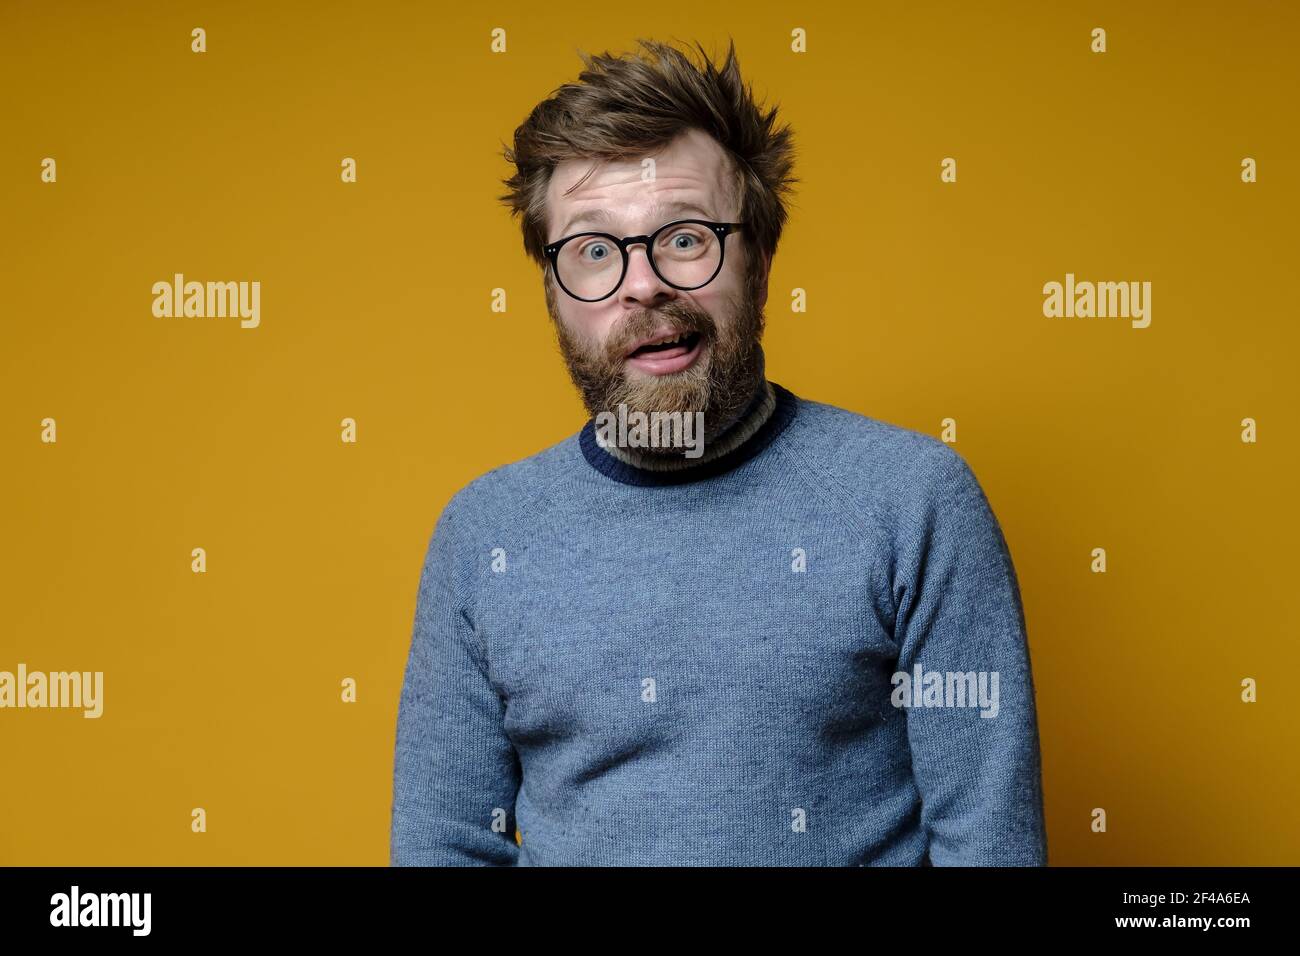 A strange shaggy man with glasses, with a stupid expression on his face, looks at the camera in bewilderment. Yellow background. Stock Photo